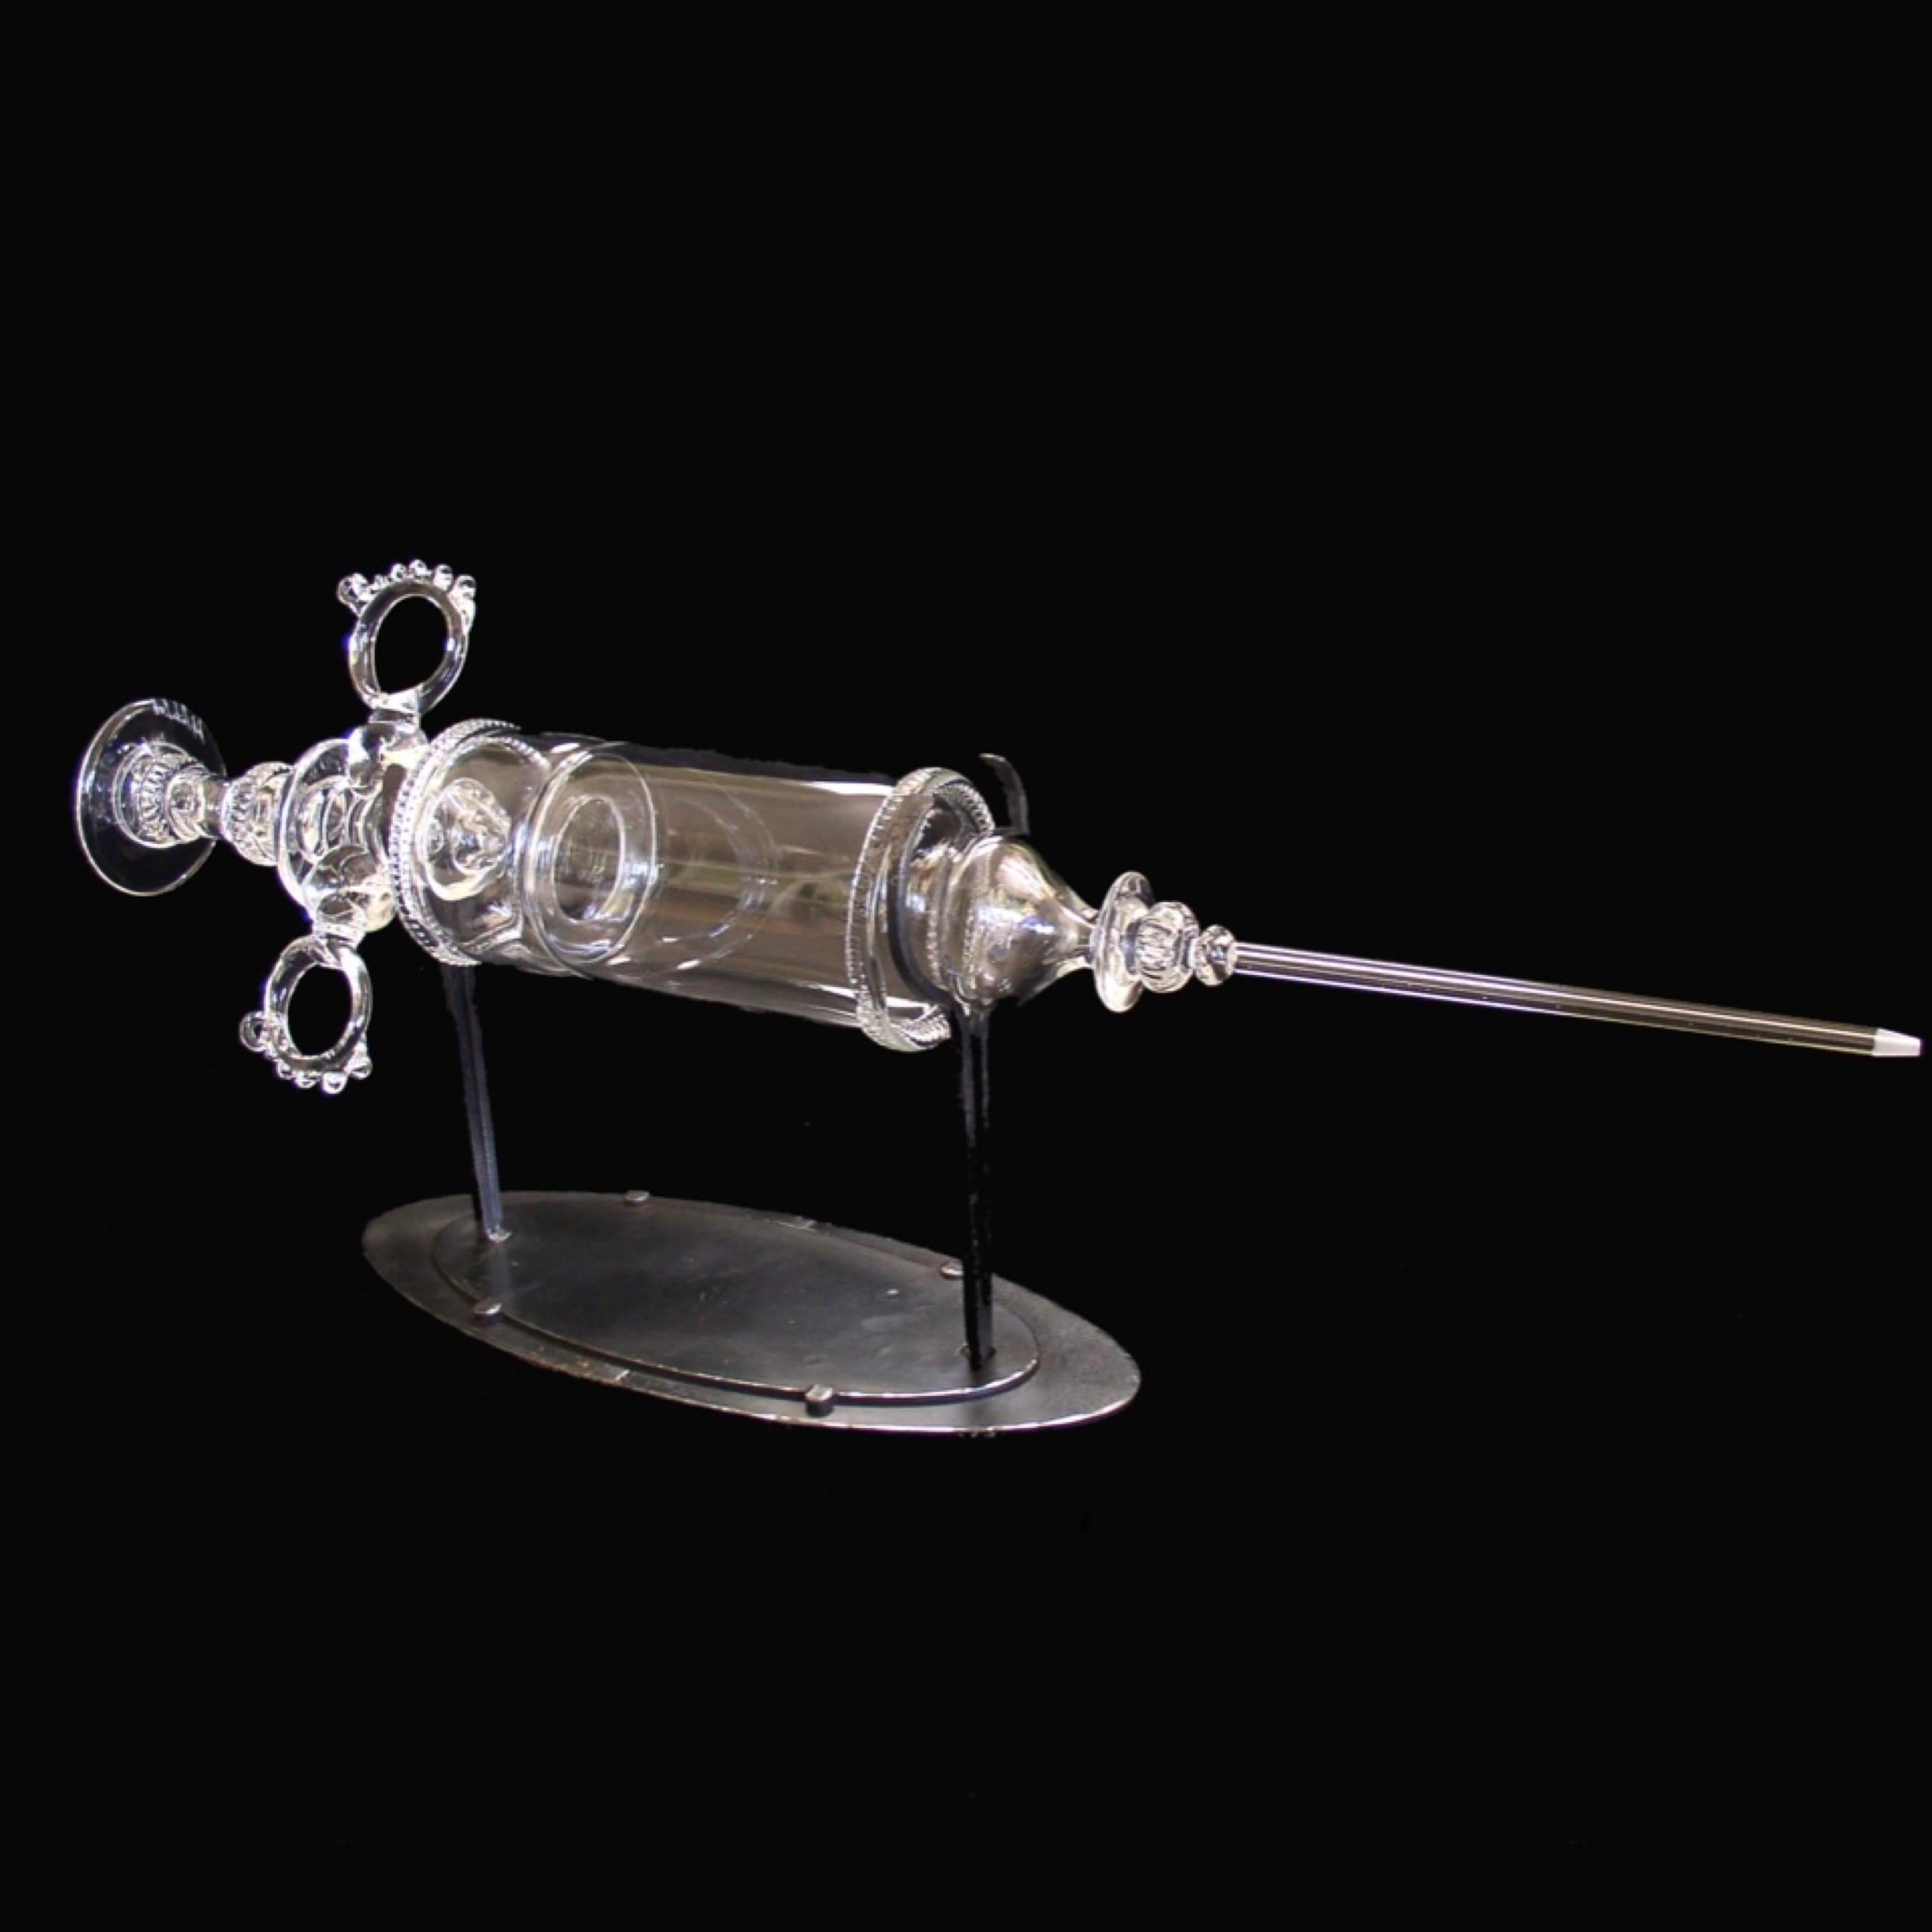 Large Blown Glass Syringe on Metal Stand

Hand Signed 2011 on Base

Can Be Turned On Base To Change Appearance

